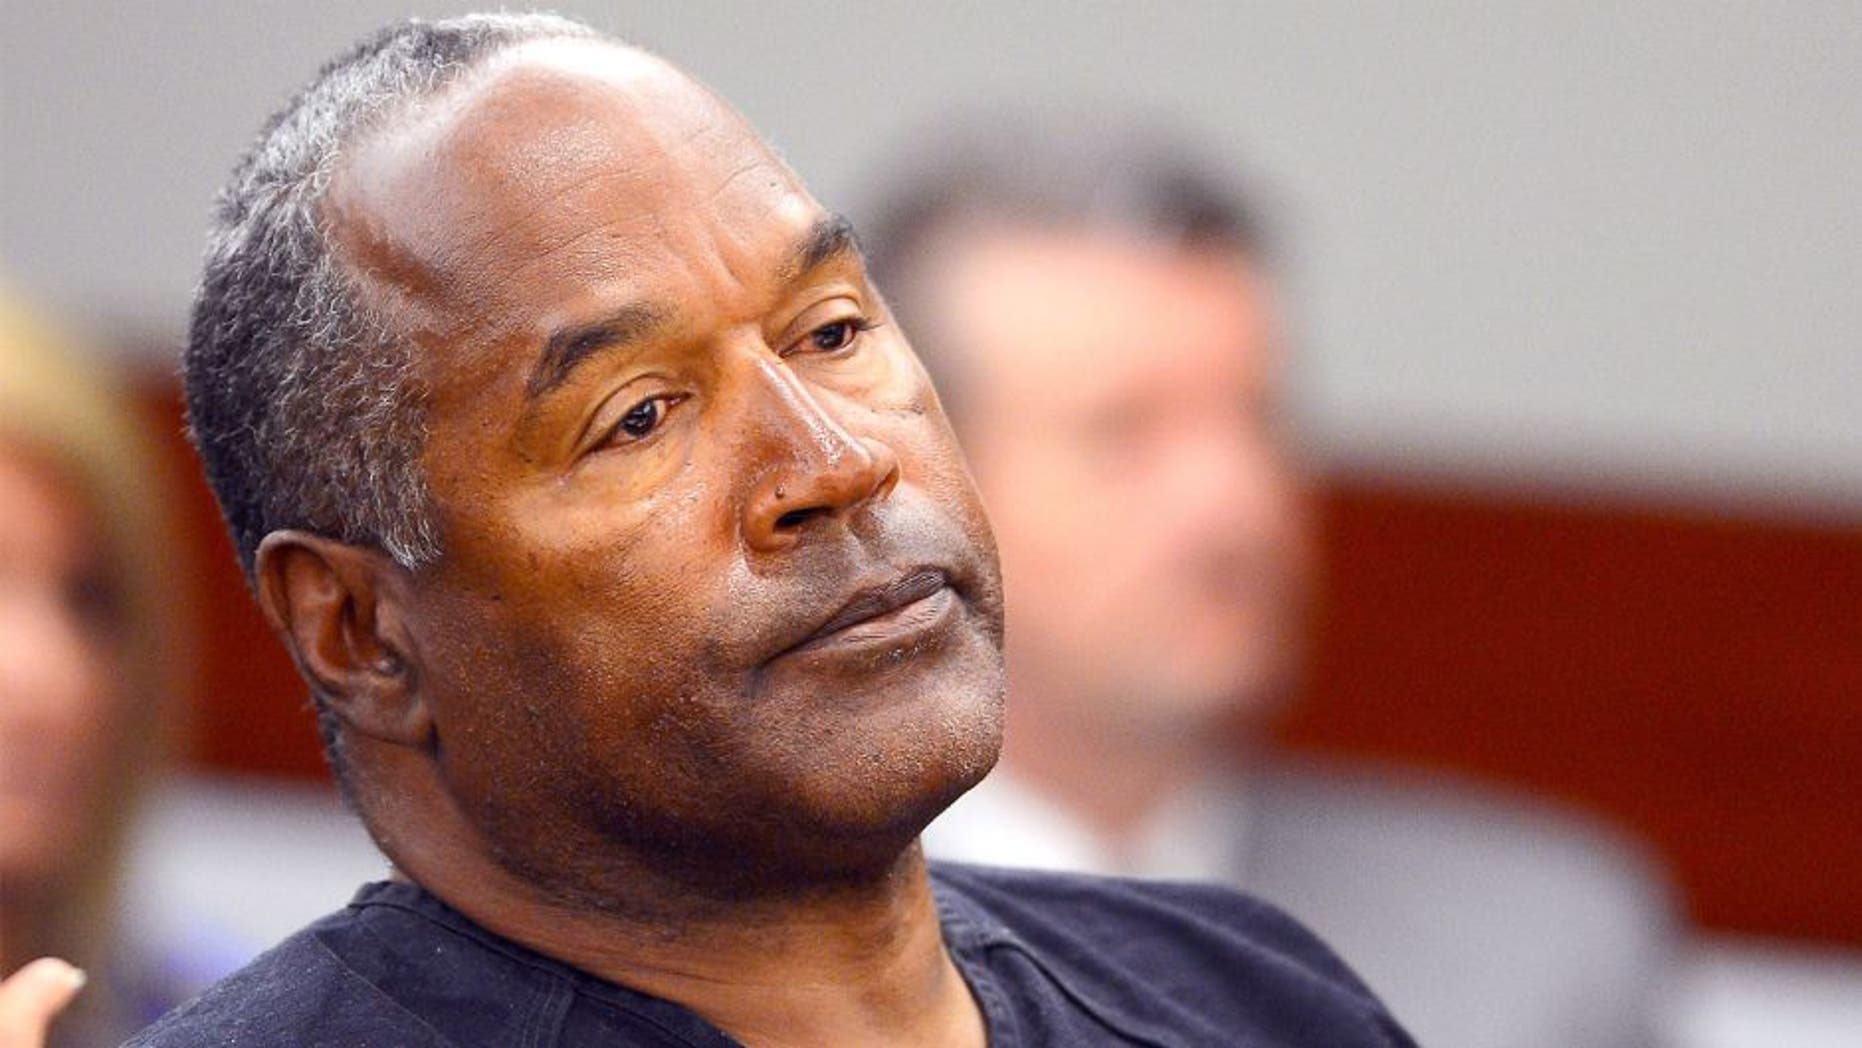 Report: LAPD examining a knife found buried at O.J. Simpson's estate ...